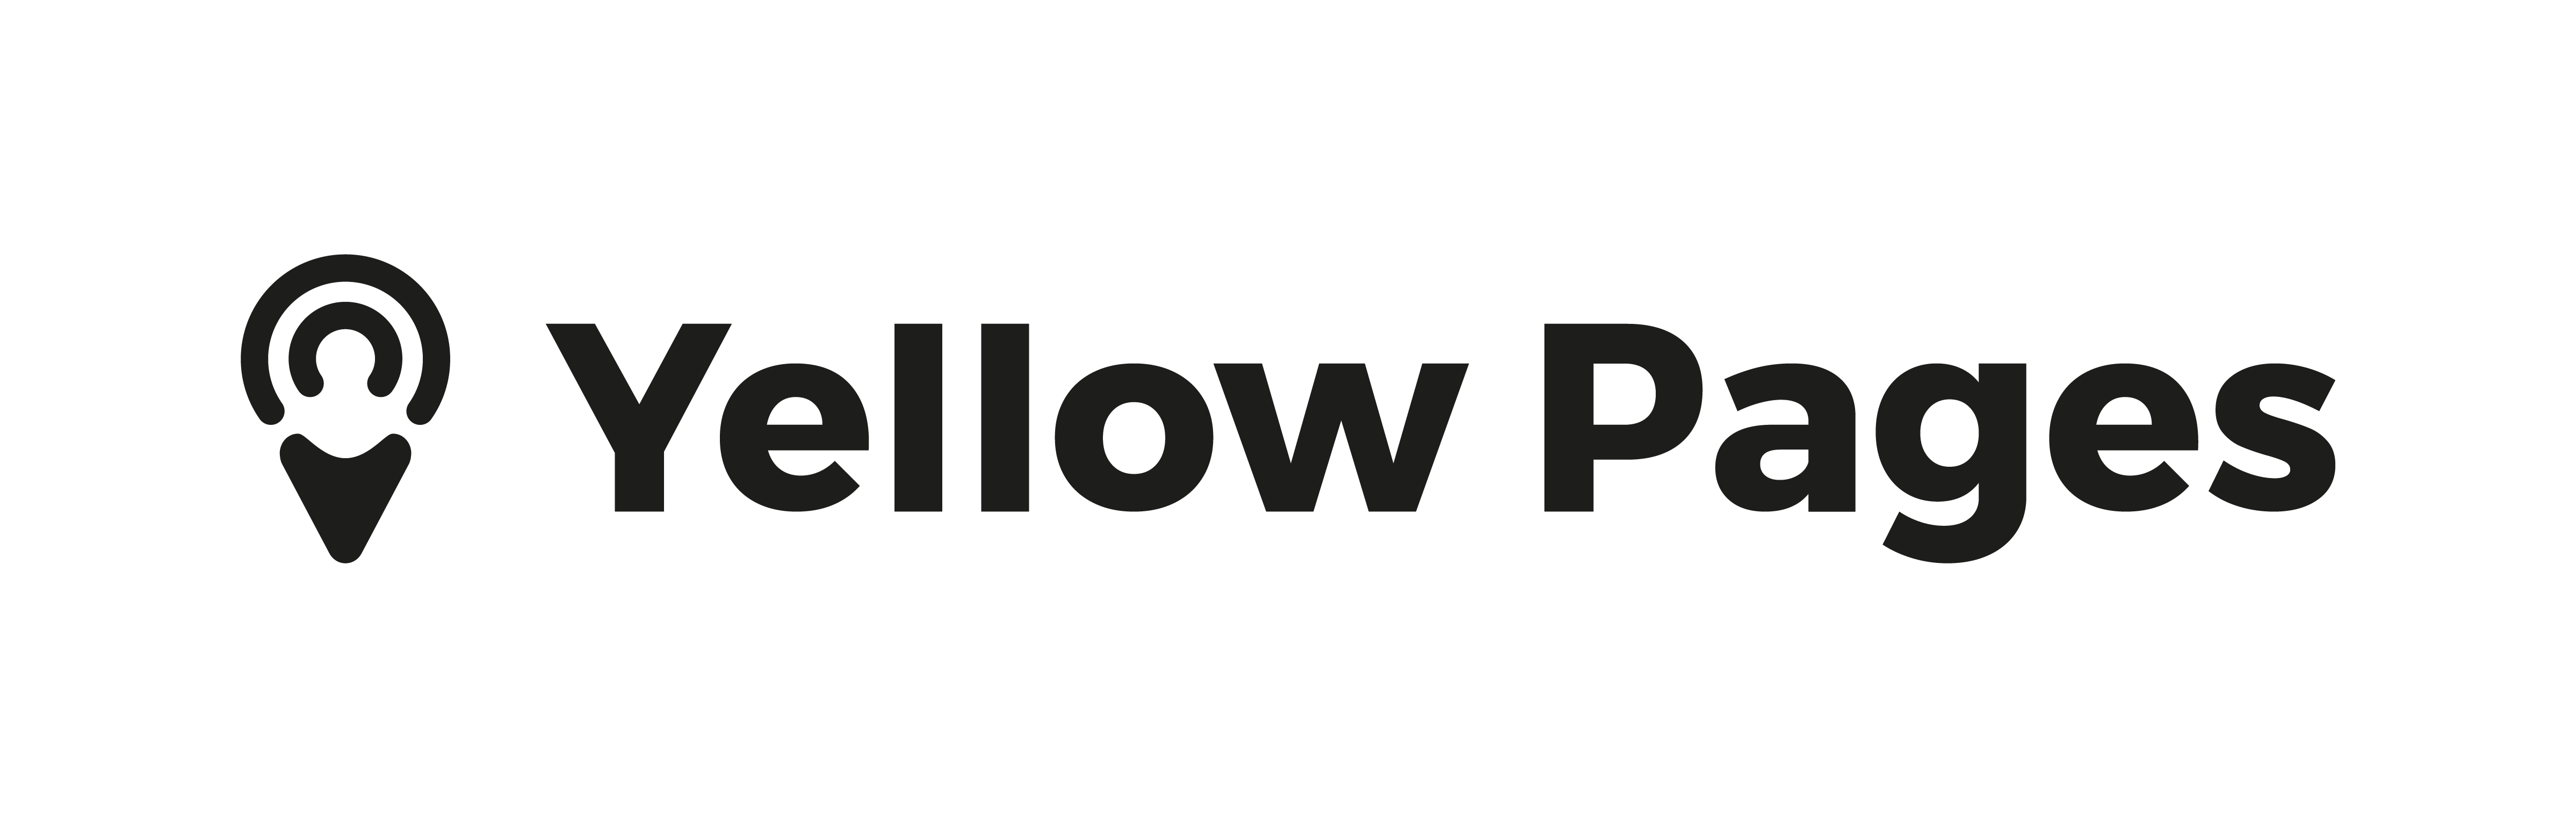 Yellow Pages Network